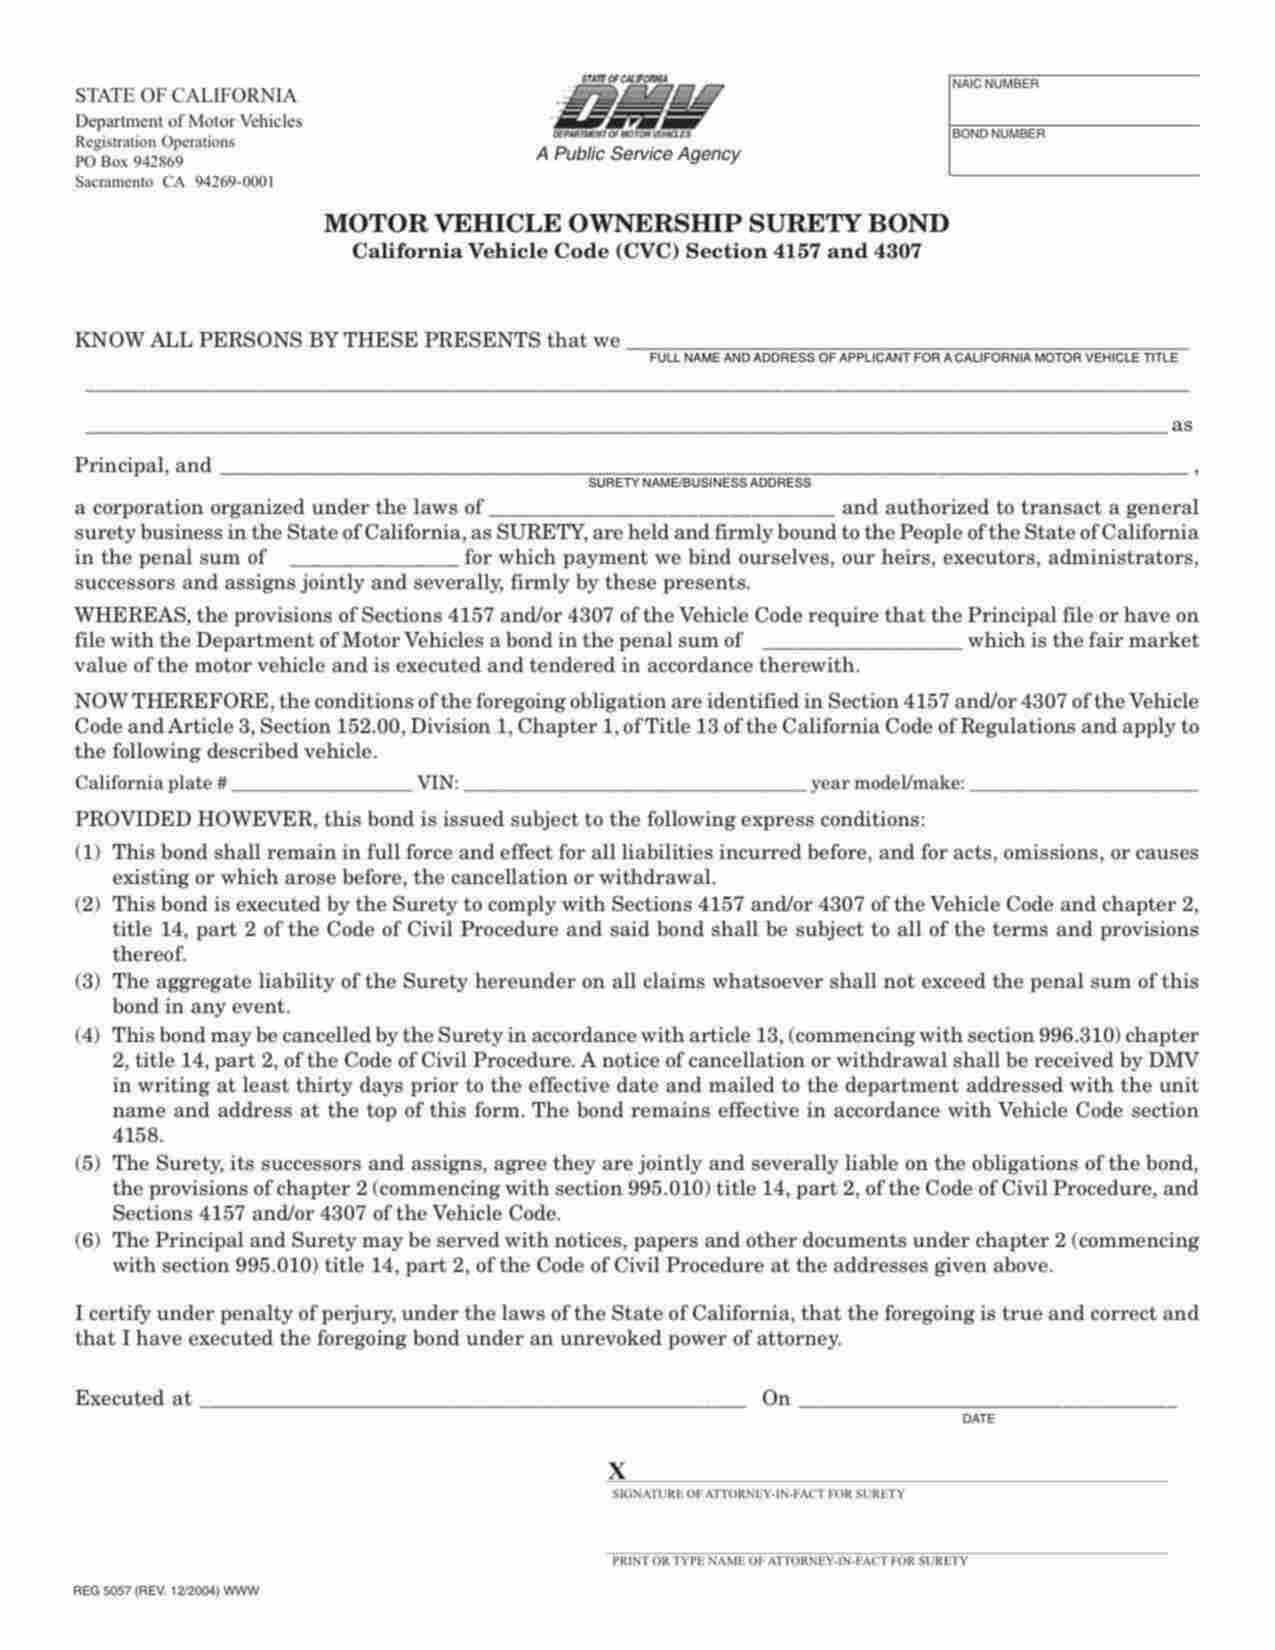 California Motor Vehicle Ownership - Lost Title Bond Form